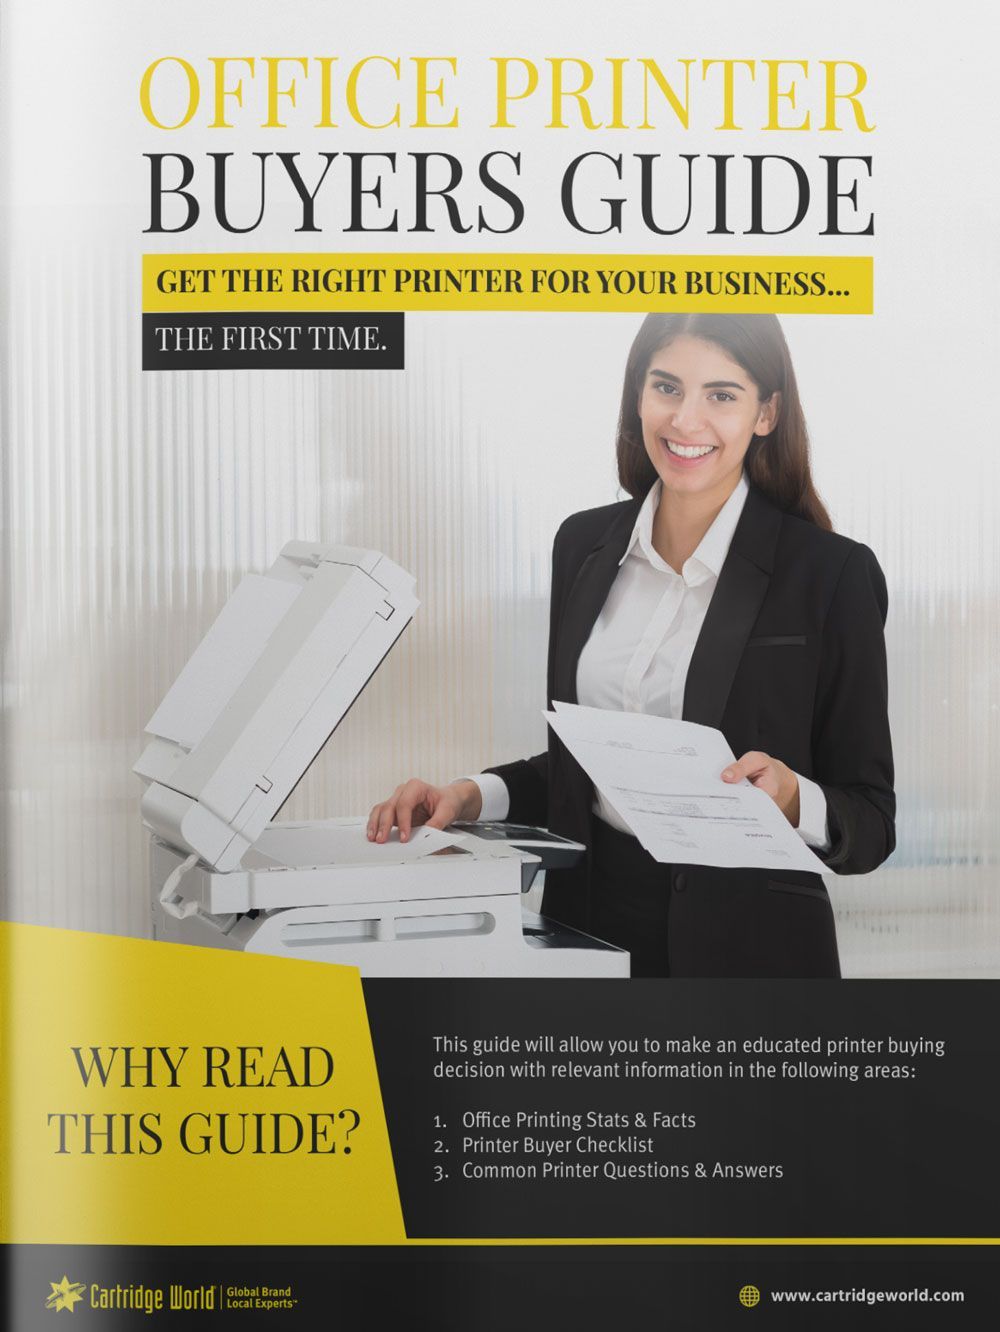 Buyers Guide and master your printing environment once and for all